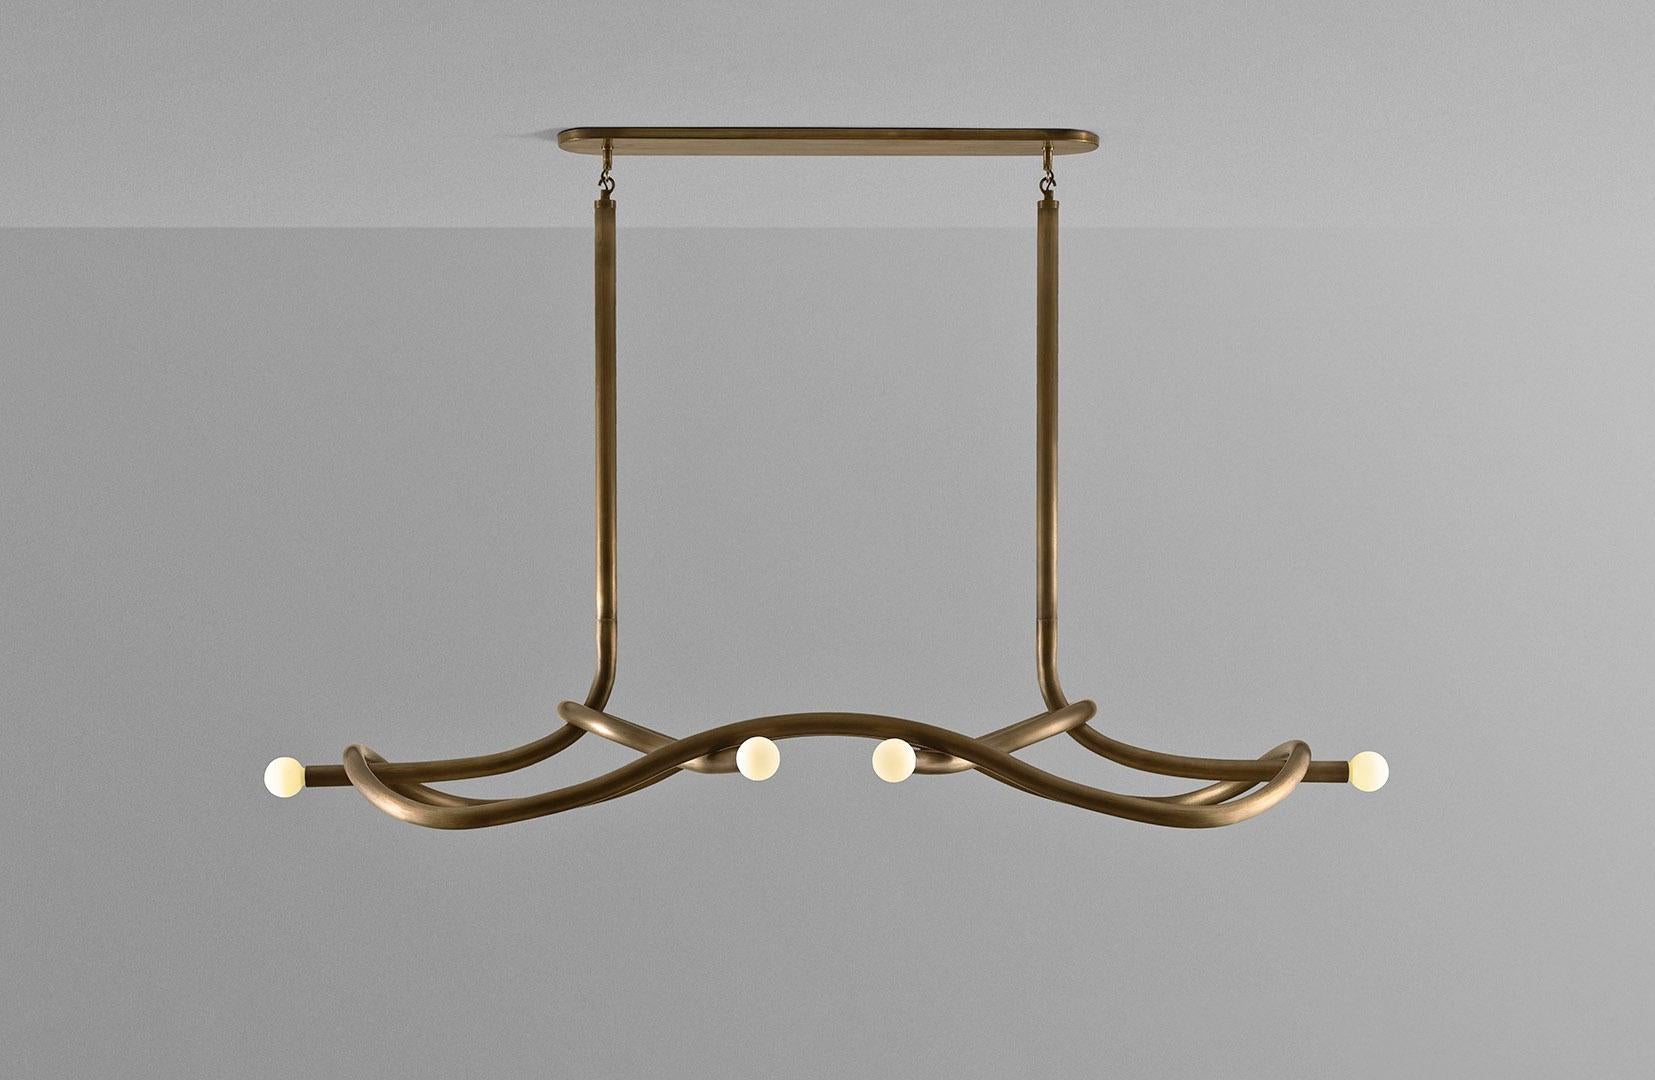 Contemporary Burnt Brass Chandelier, Tryst Six by Paul Matter

Tryst chandelier explores the relationship between interlocked forms in perfect union and balance. A study of form and function that evokes the grace and strength of the contributor